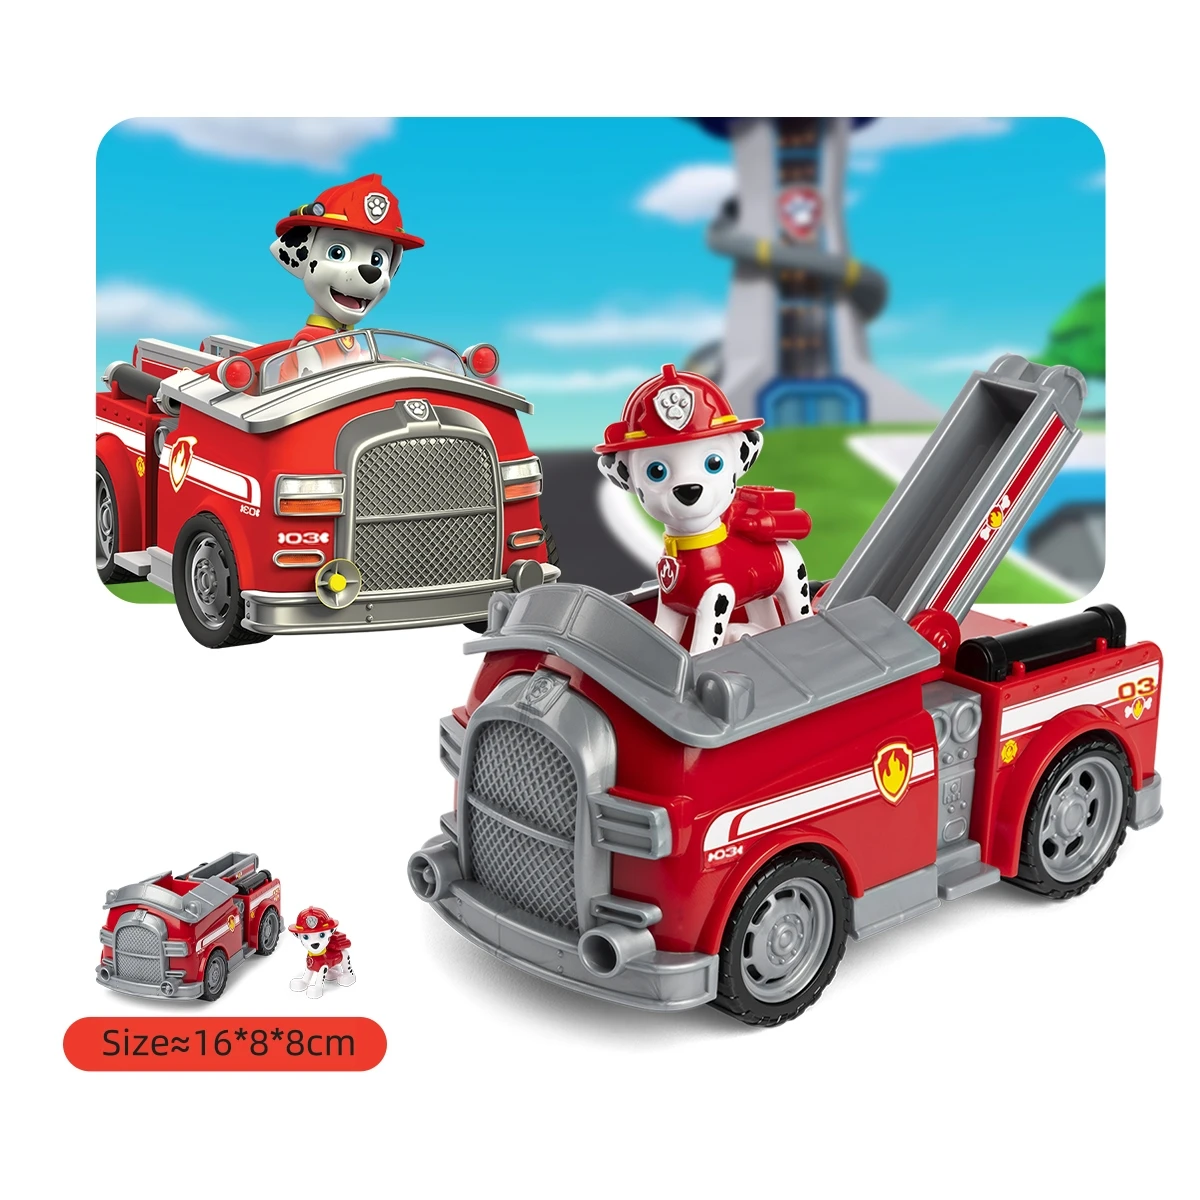 Paw Patrol Marshall's Patrol Cruiser Toy Car with Collectible Action Figure, Sustainably Minded Kids Toys for Boys & Girls heavenly minded mom